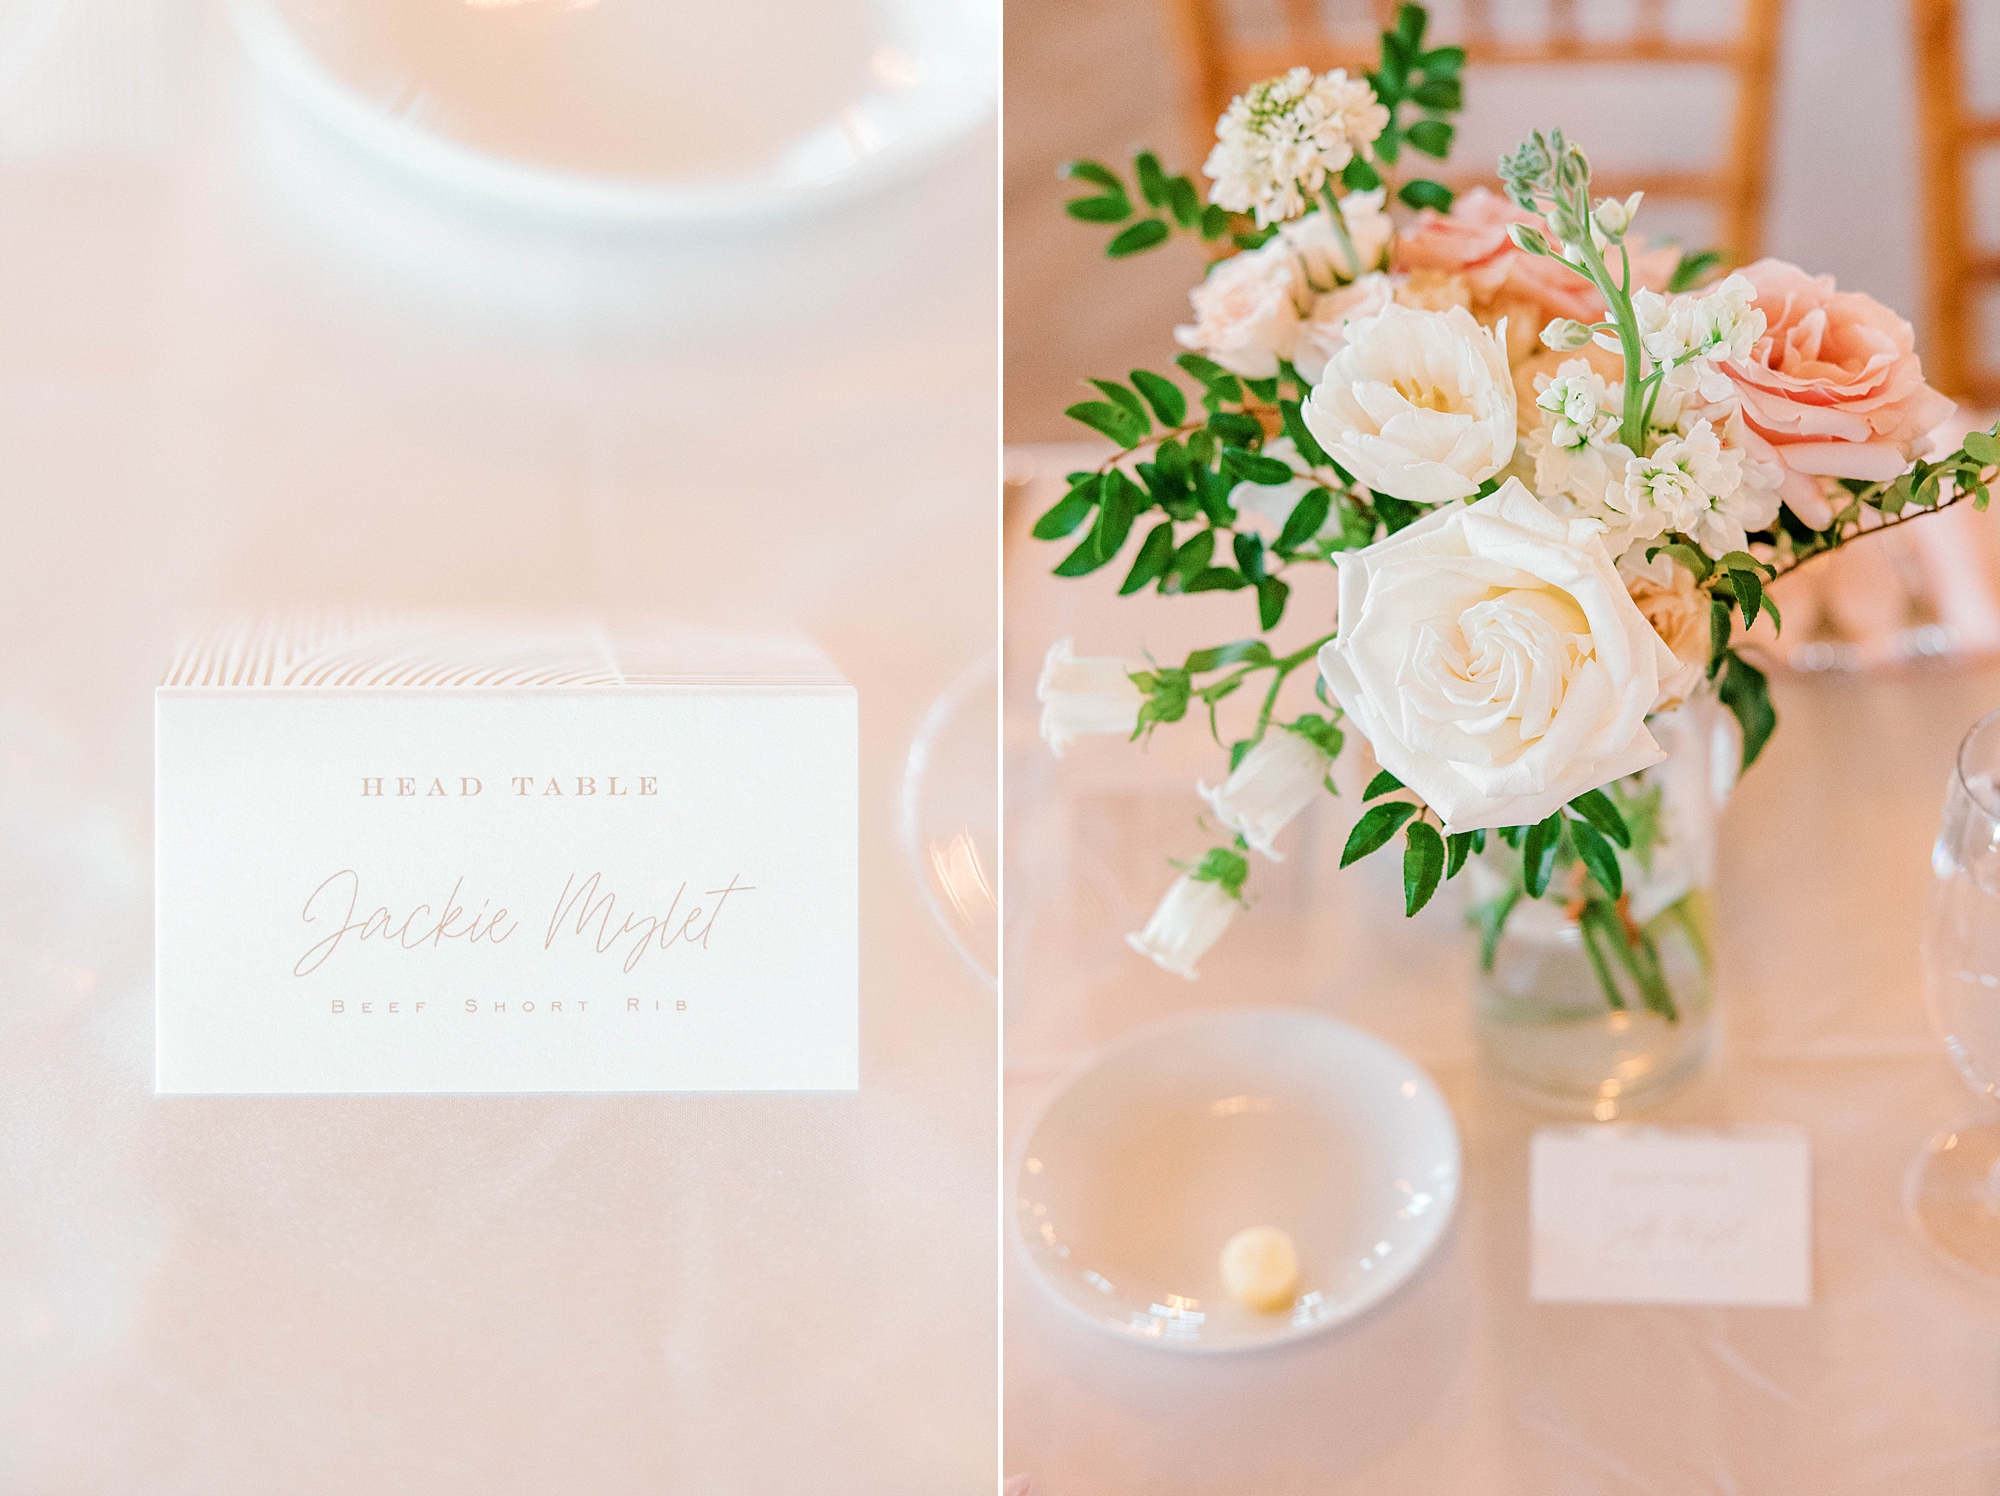 wedding reception place cards with gold script 